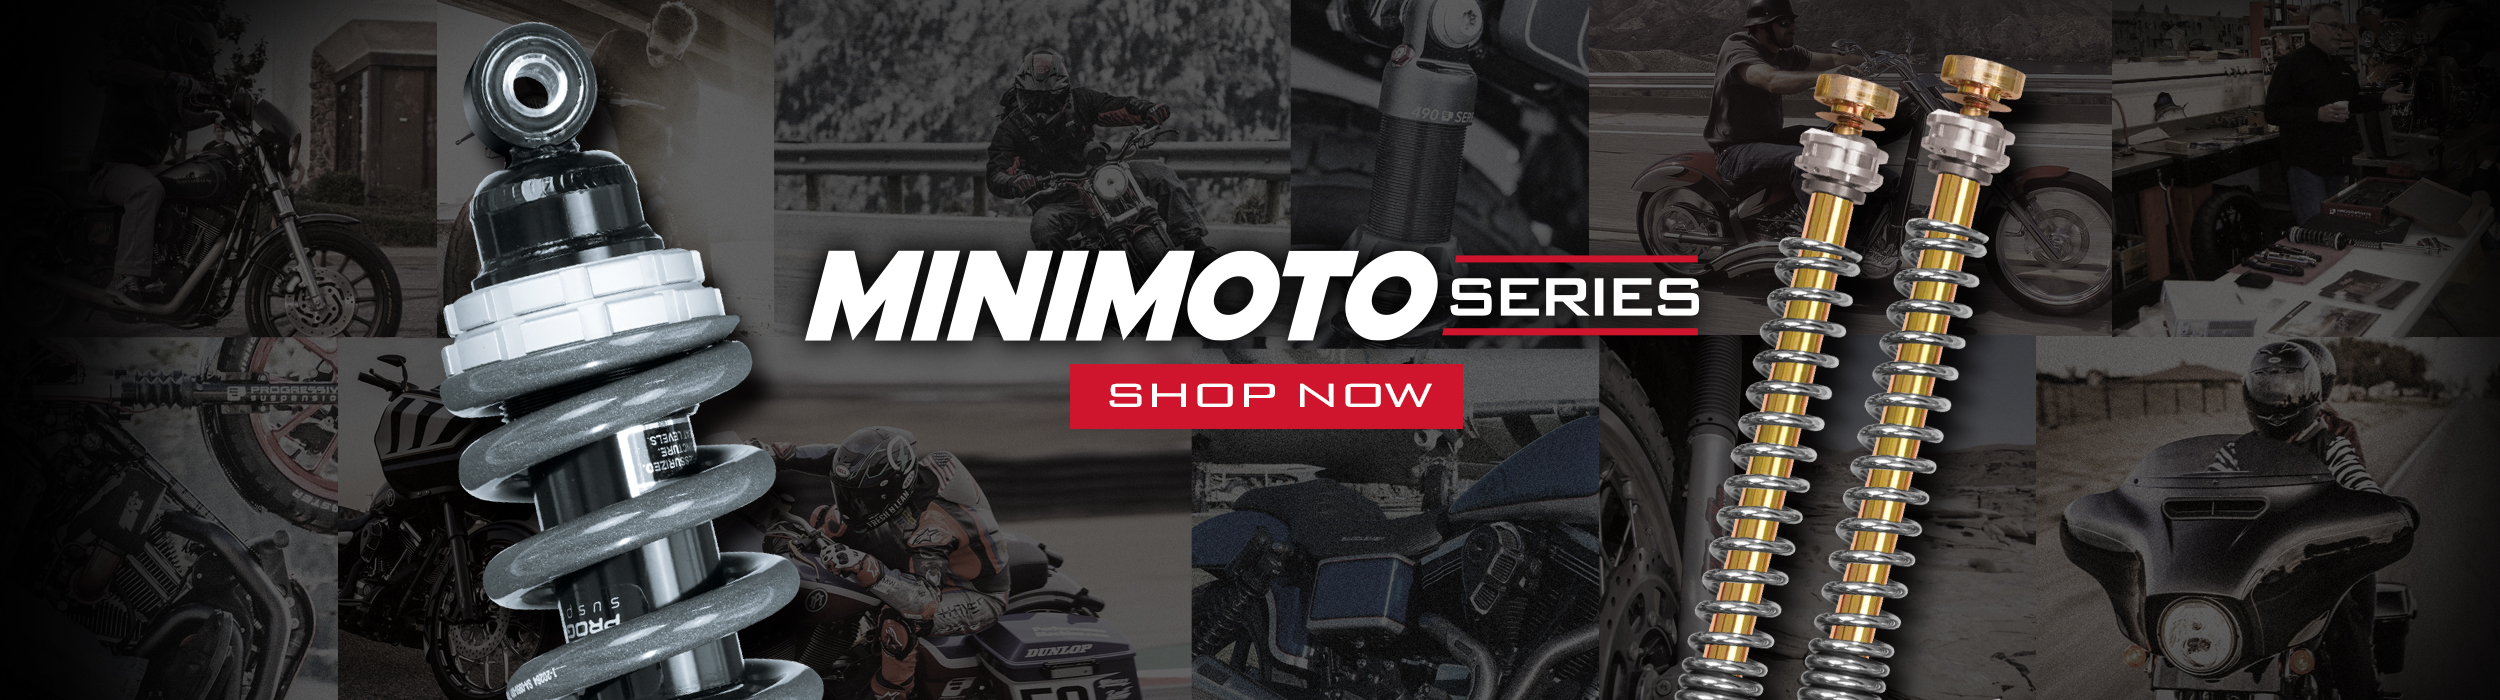 High performance motorcycle suspension, including shocks and